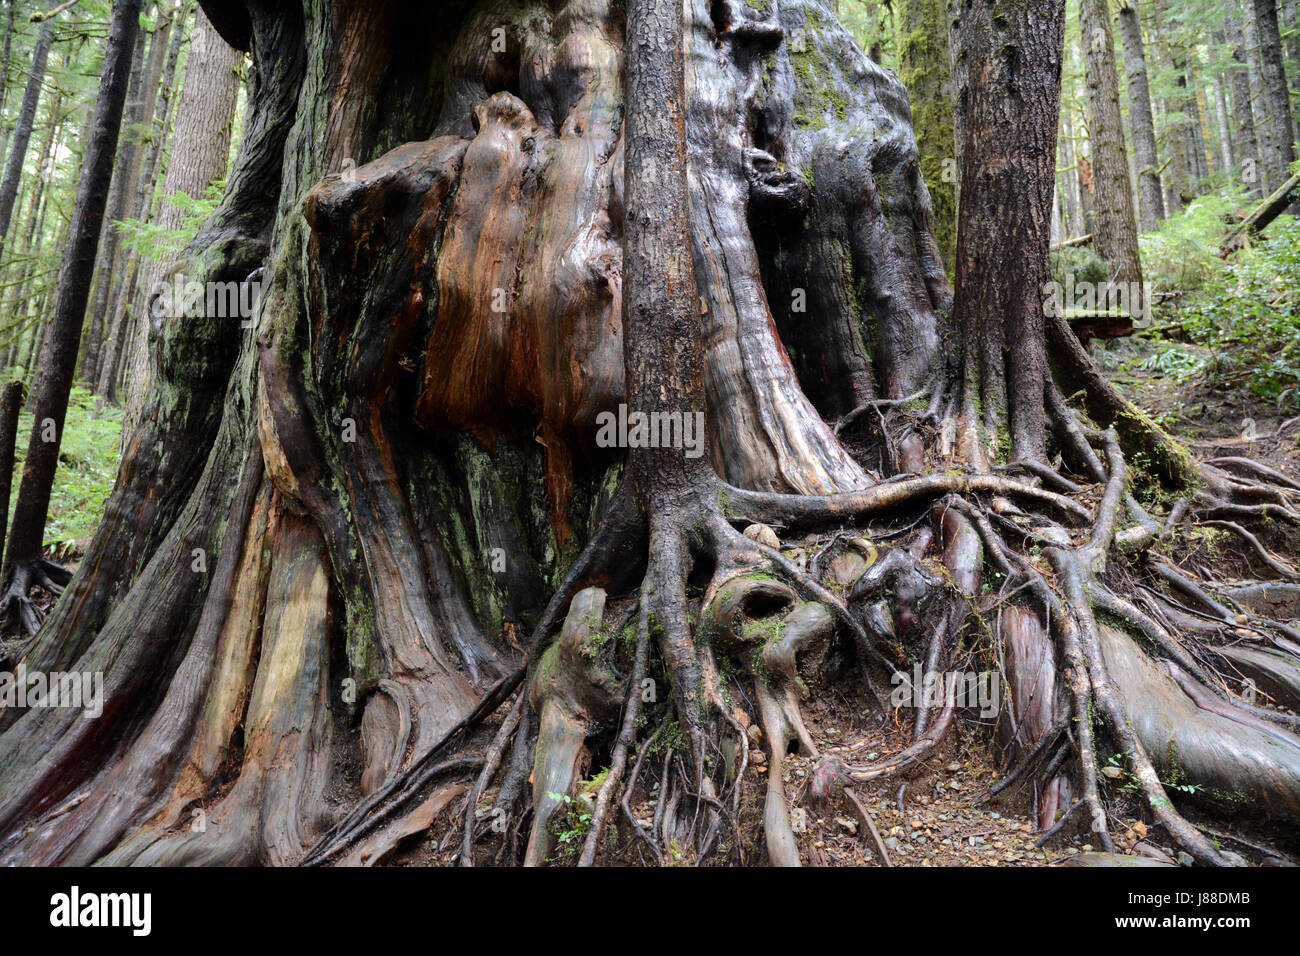 A gnarly and ancient old growth western red cedar in Avatar Grove, a rainforest on Vancouver Island, British Columbia, Canada. Stock Photo